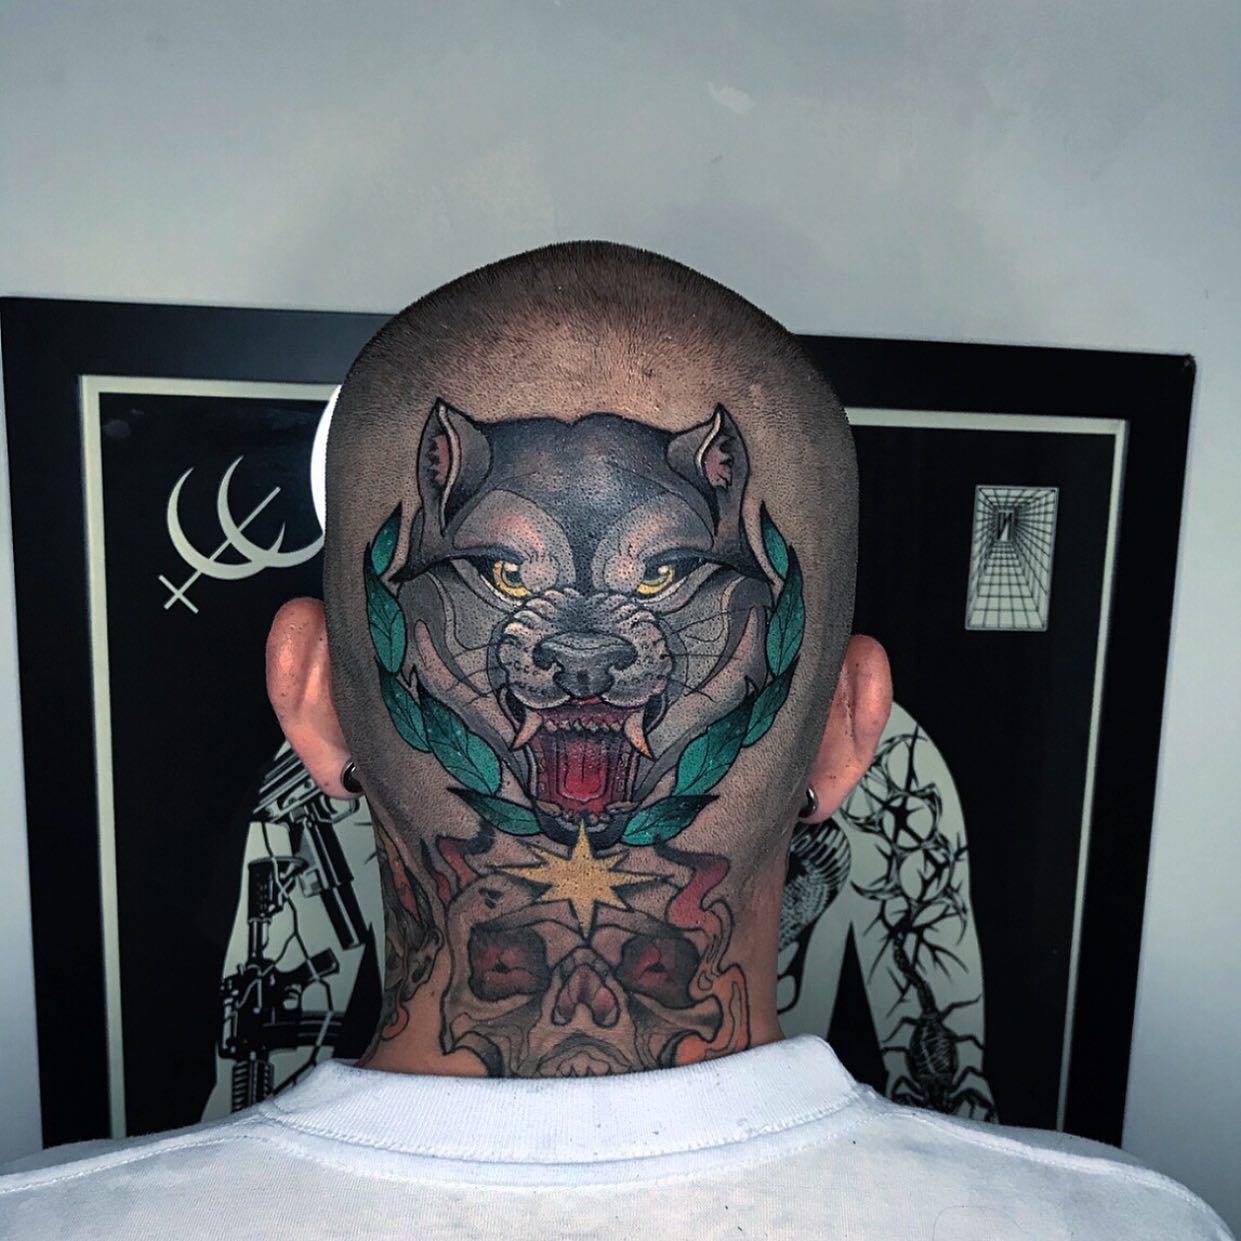 Head tattoos are not for everyone. Do you dare to give them a go?